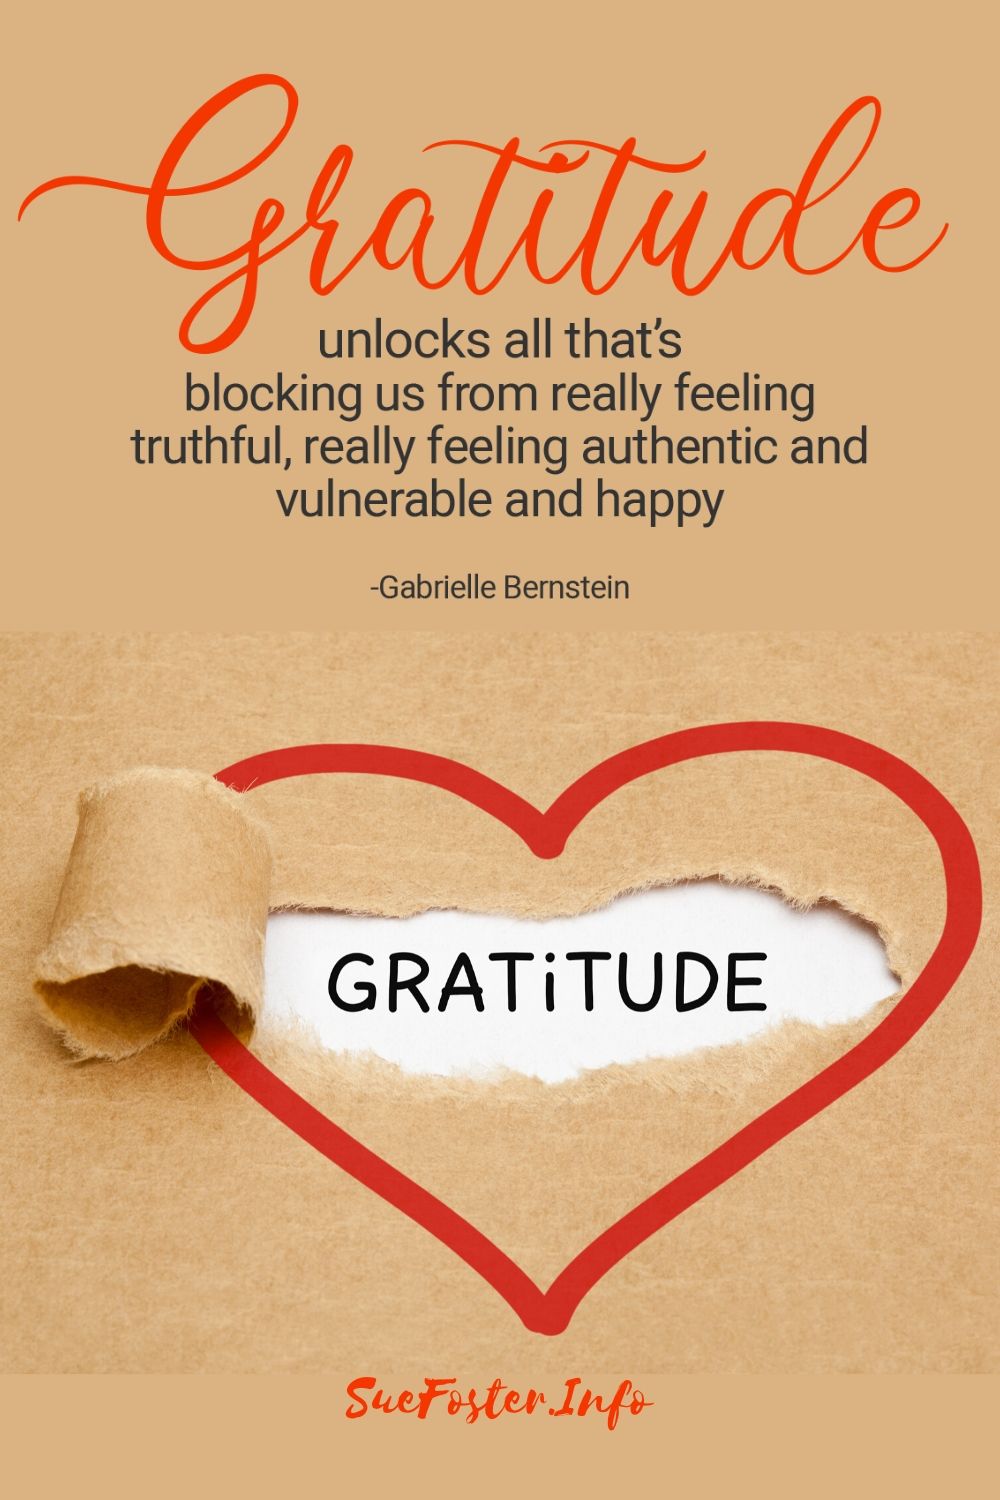 Gratitude unlocks all that's blocking us from really feeling truthful, really feeling authentic and vulnerable and happy.